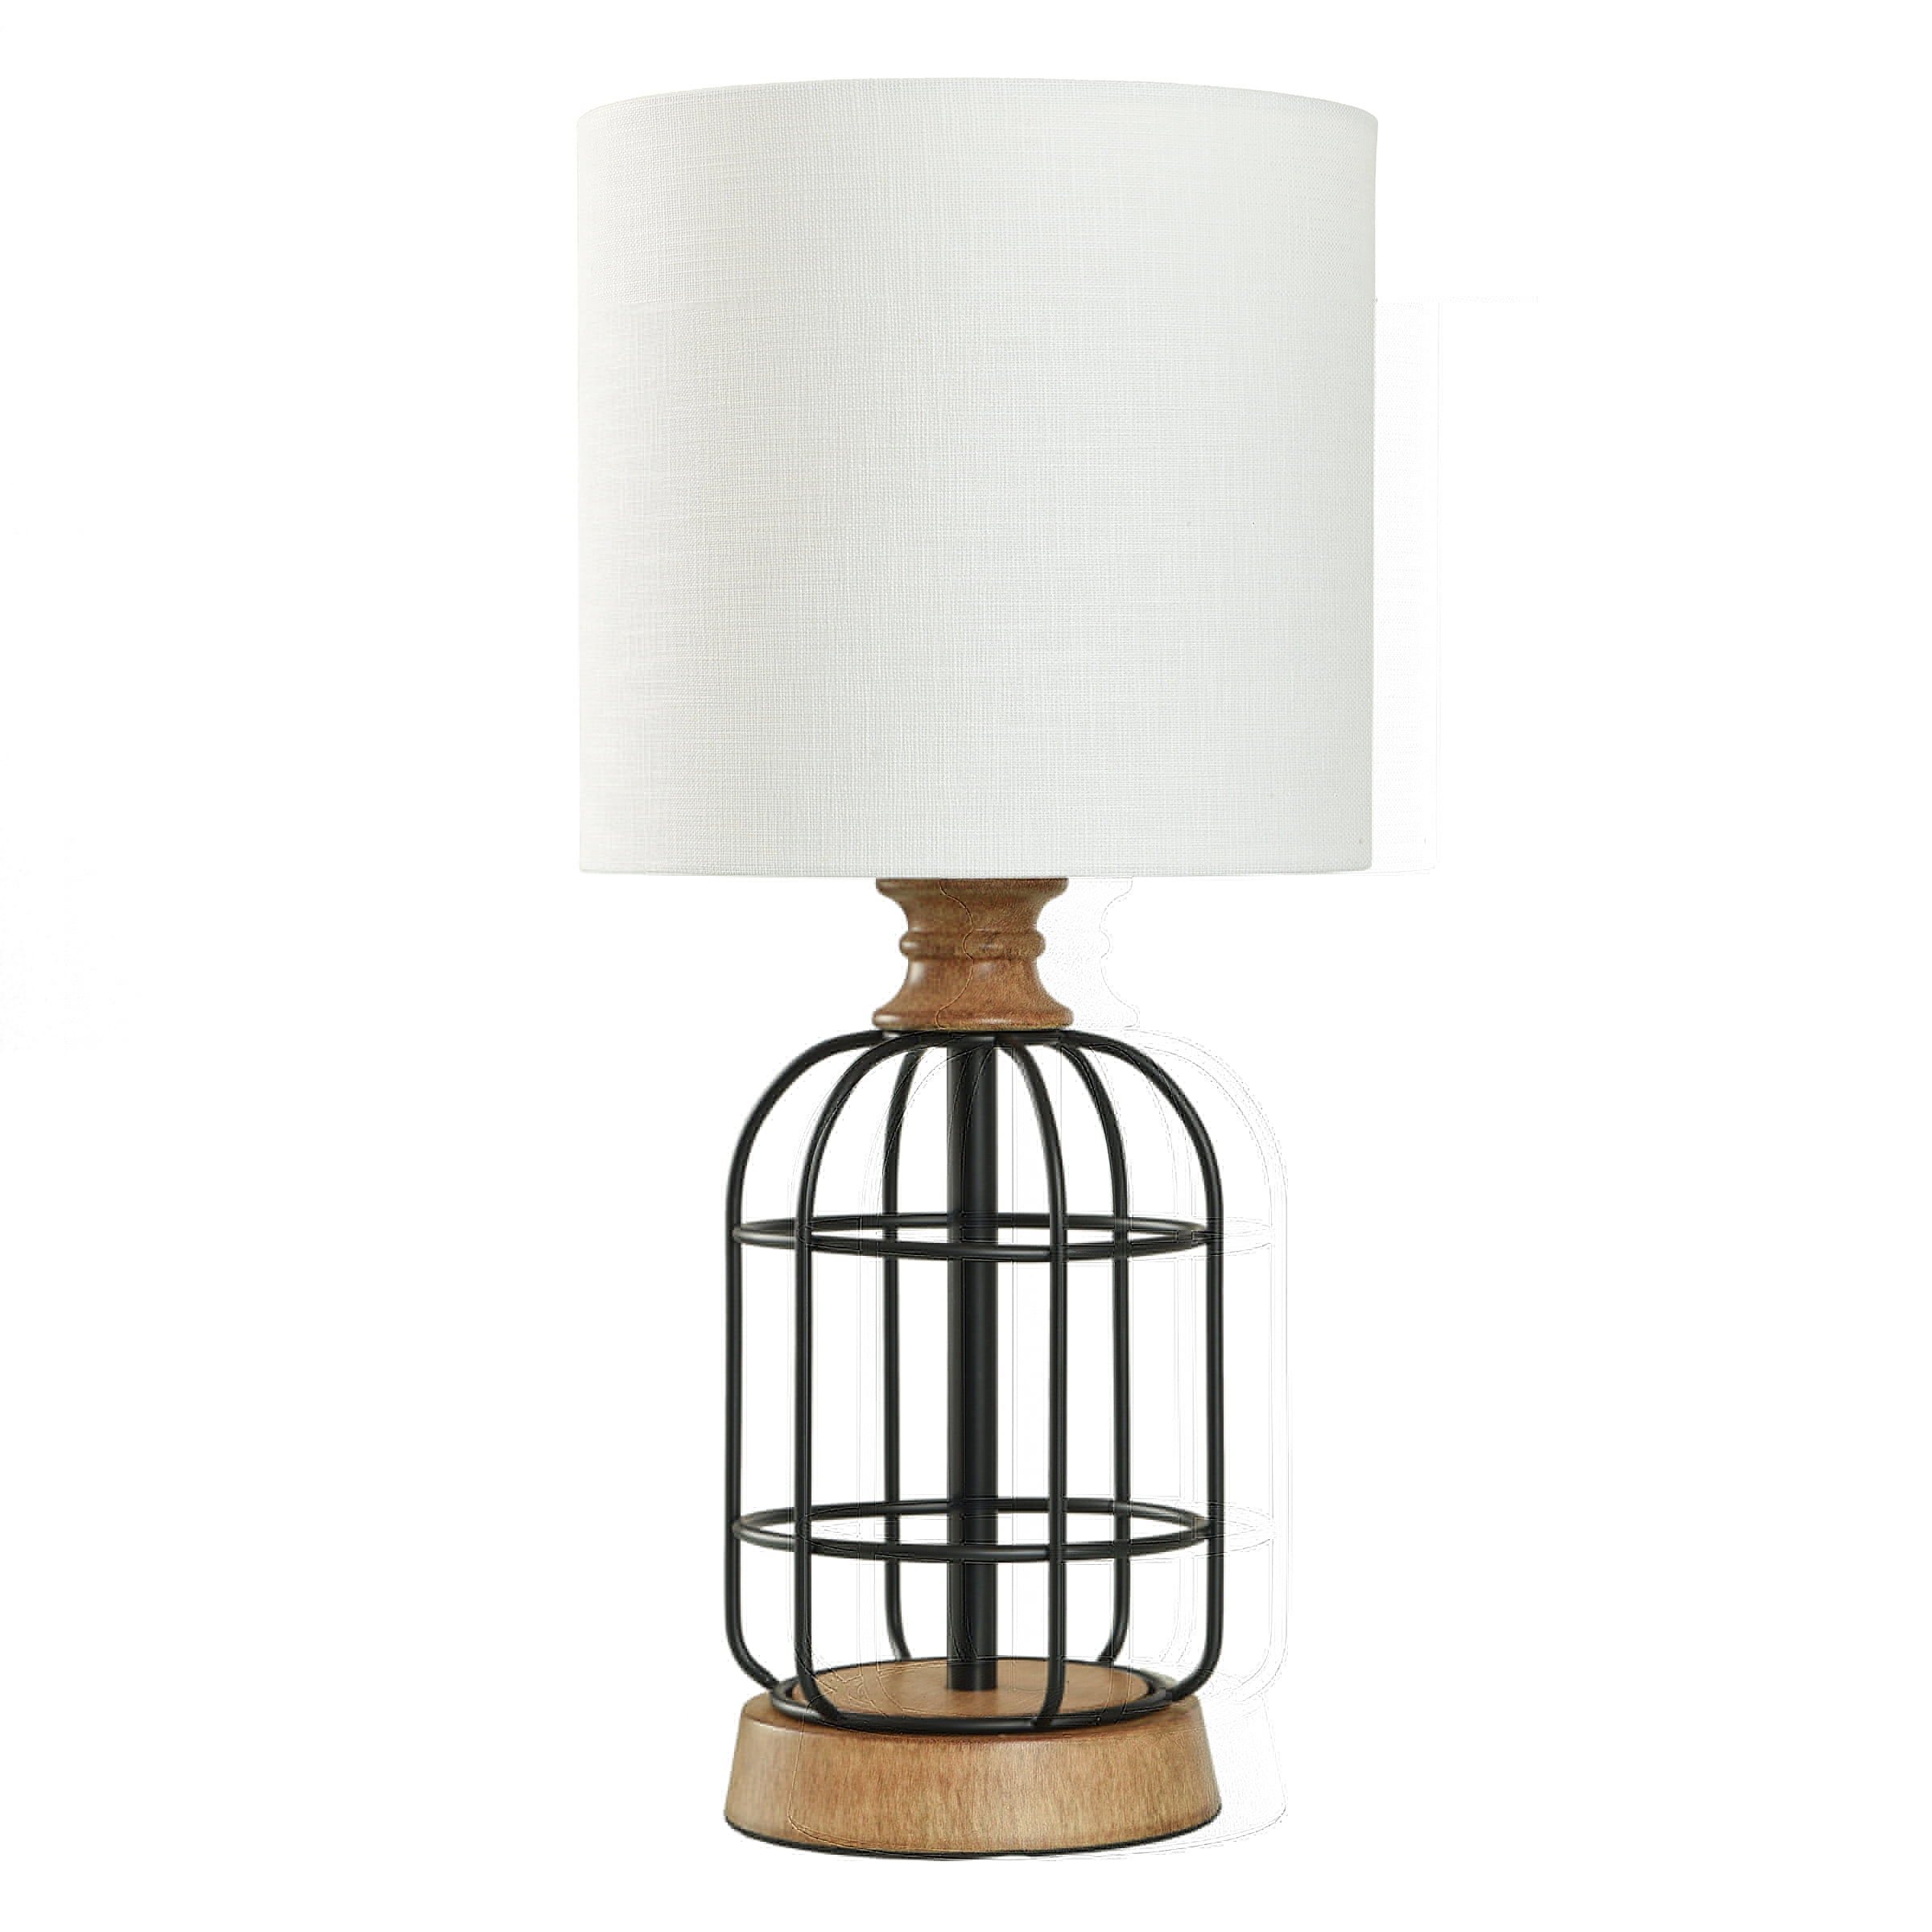 Mainstays Black Metal Cage Table Lamp with Wood Accents and Drum Shade, 17"